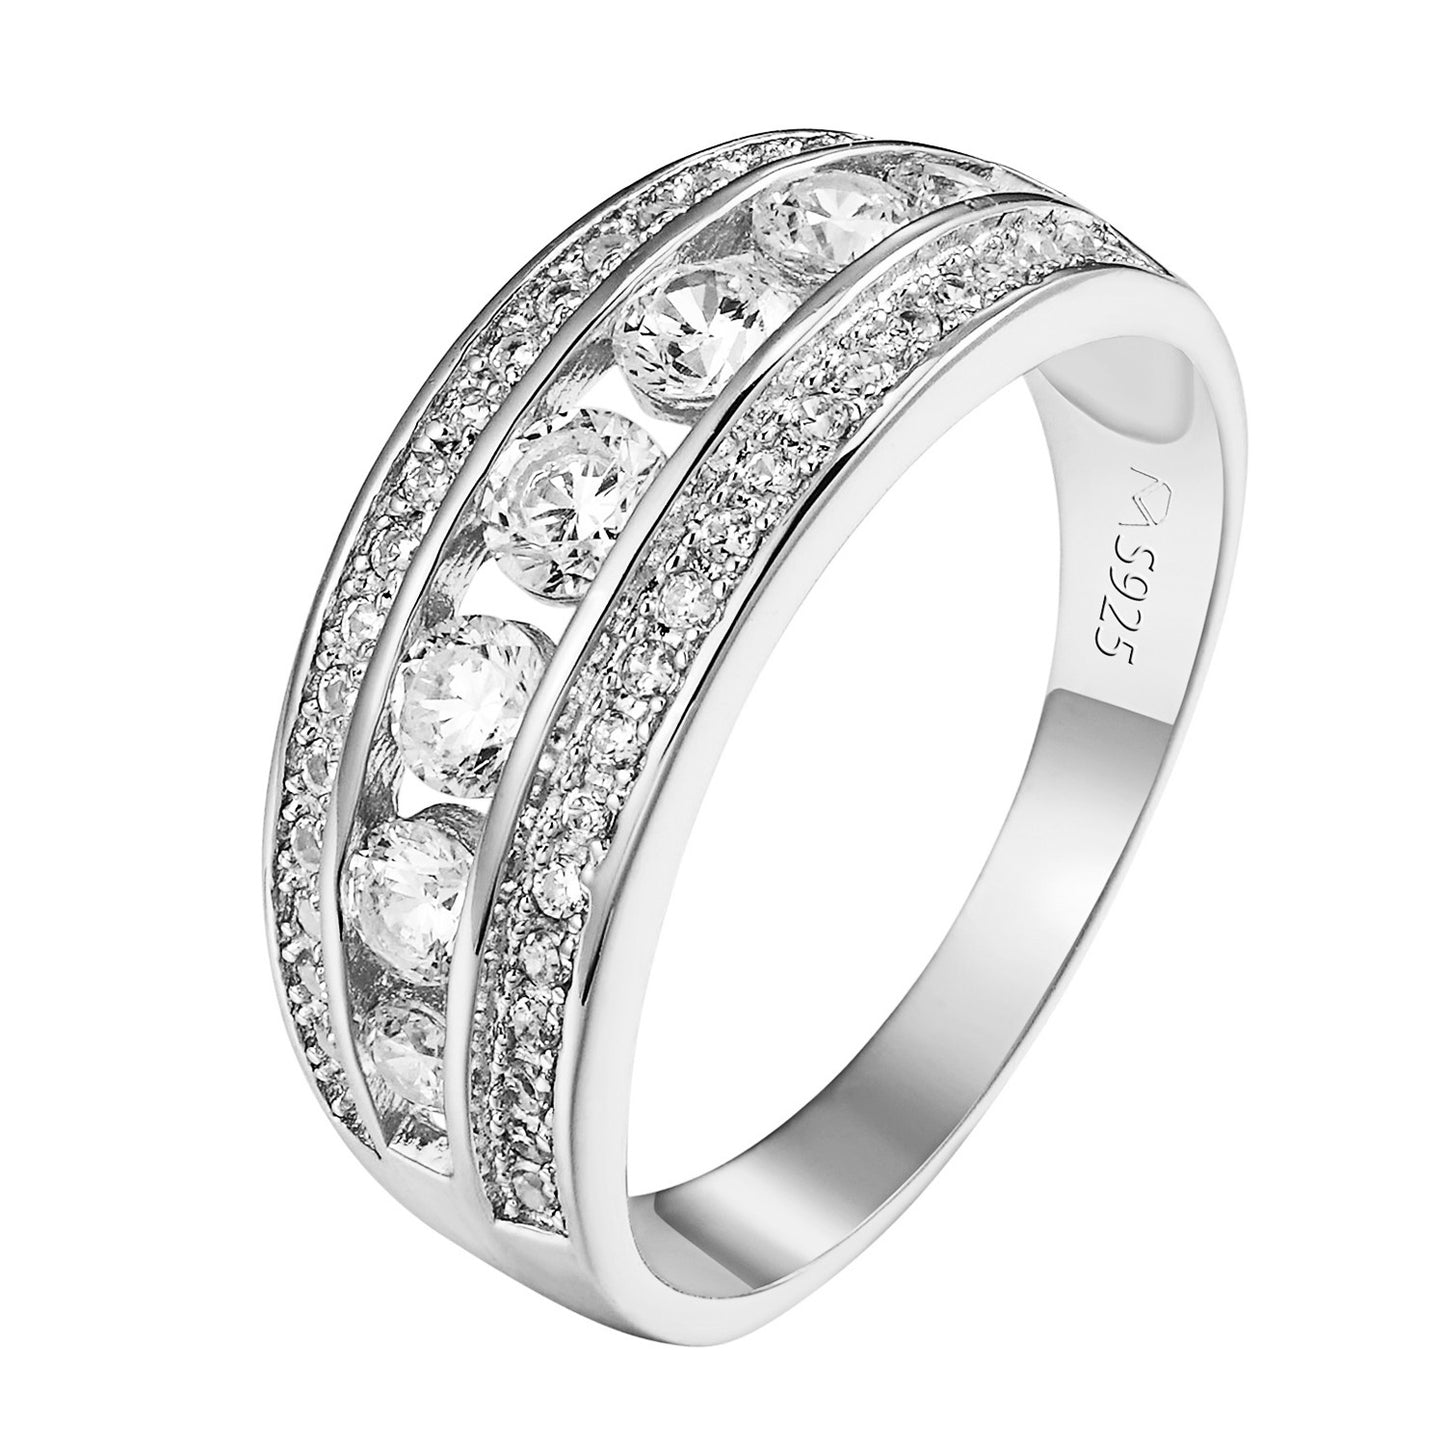 Solitaire Wedding Ring Womens Sterling Silver Round Cut Simulated Diamond Bridal